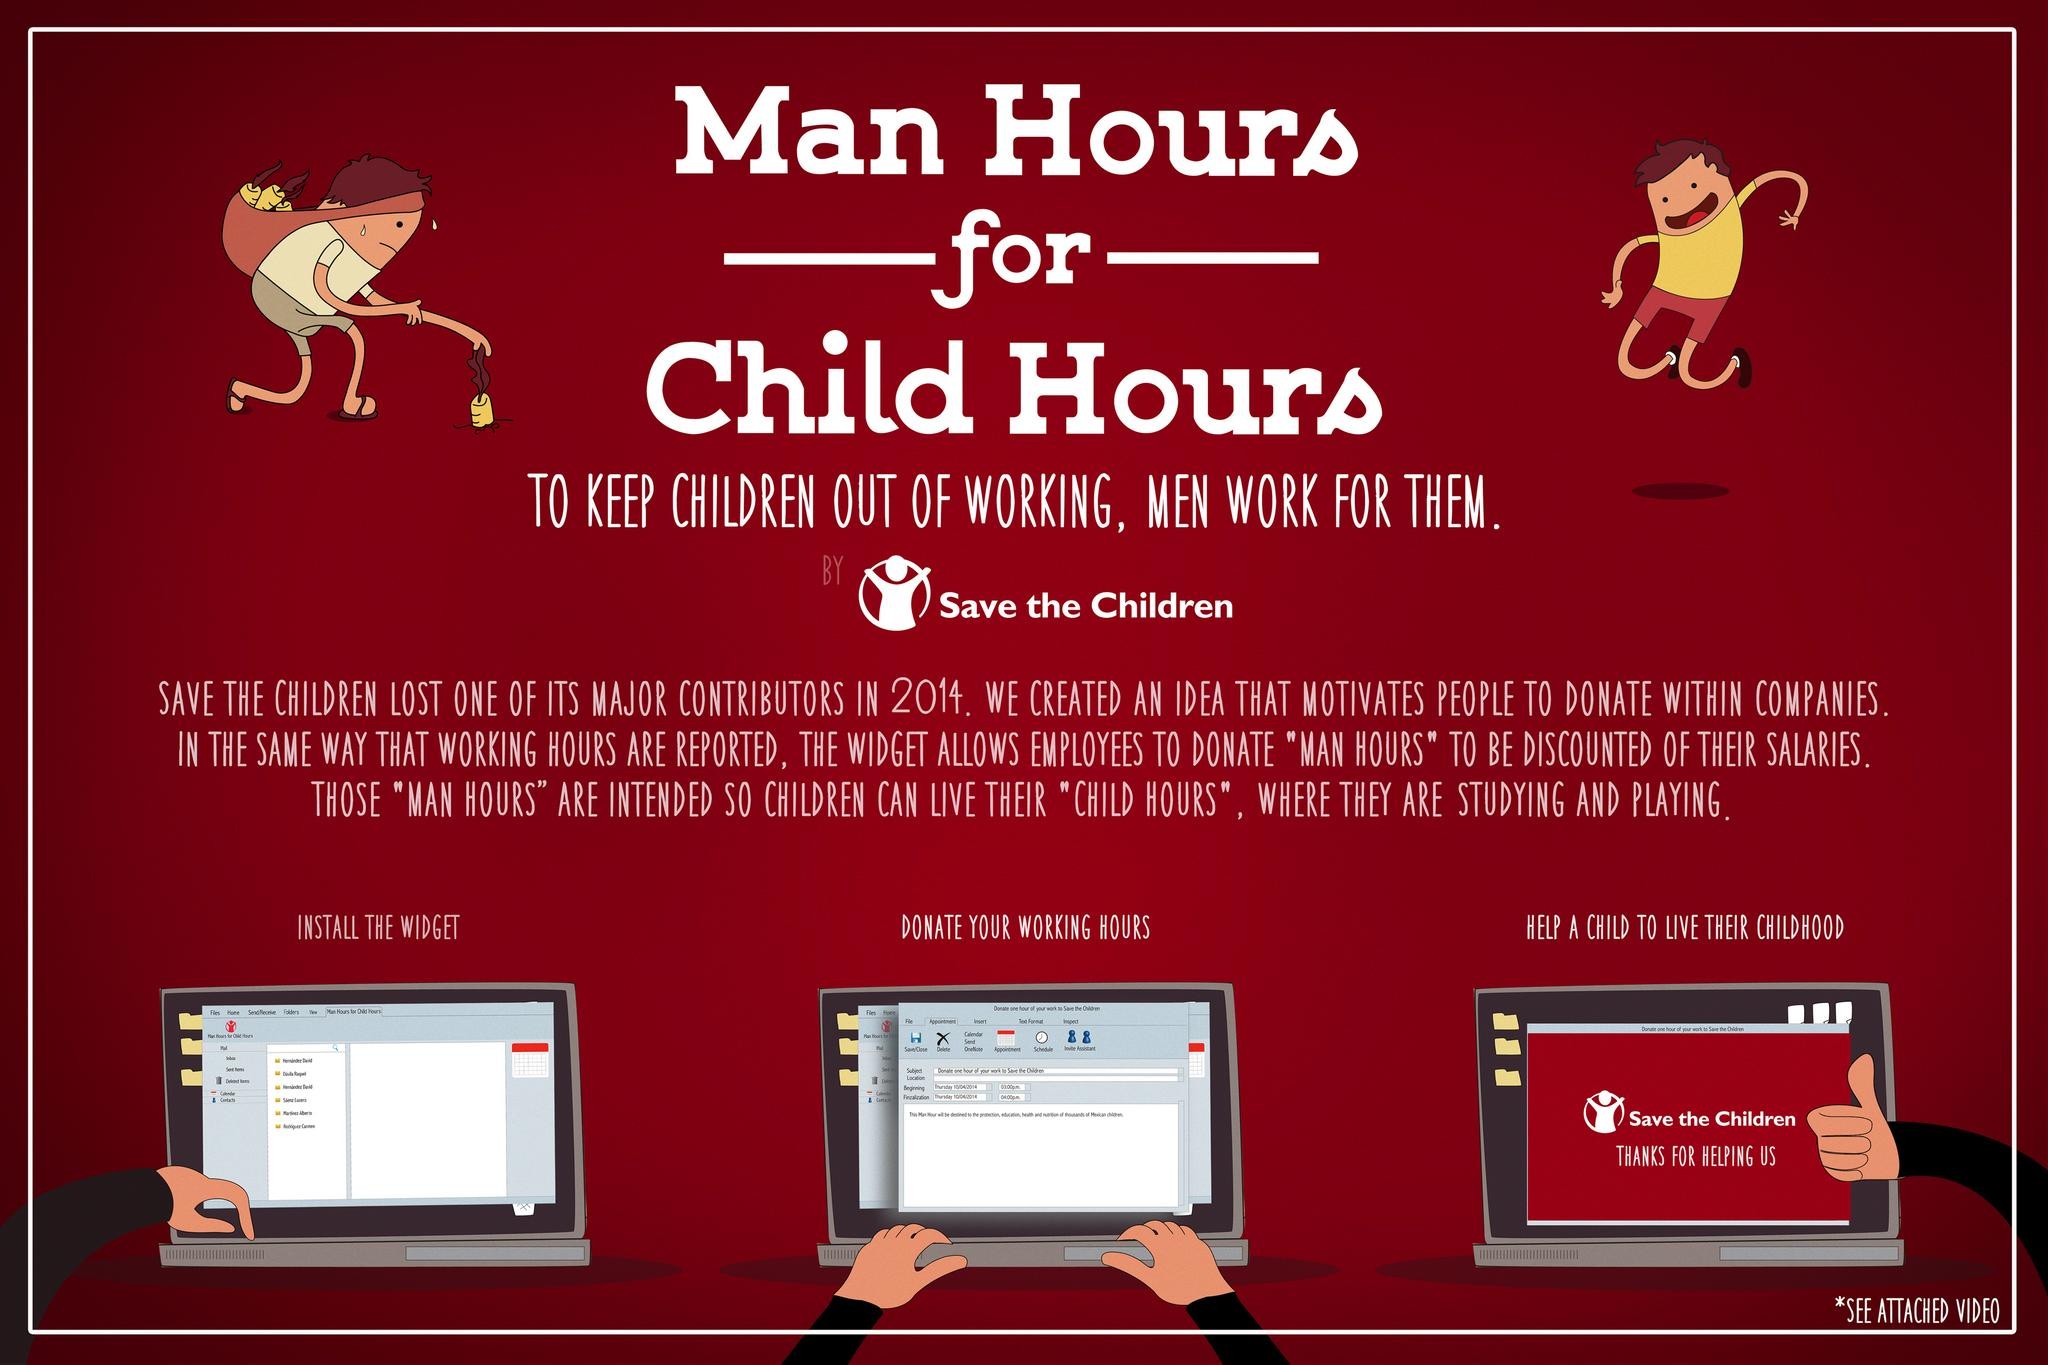 MAN HOURS FOR CHILD HOURS